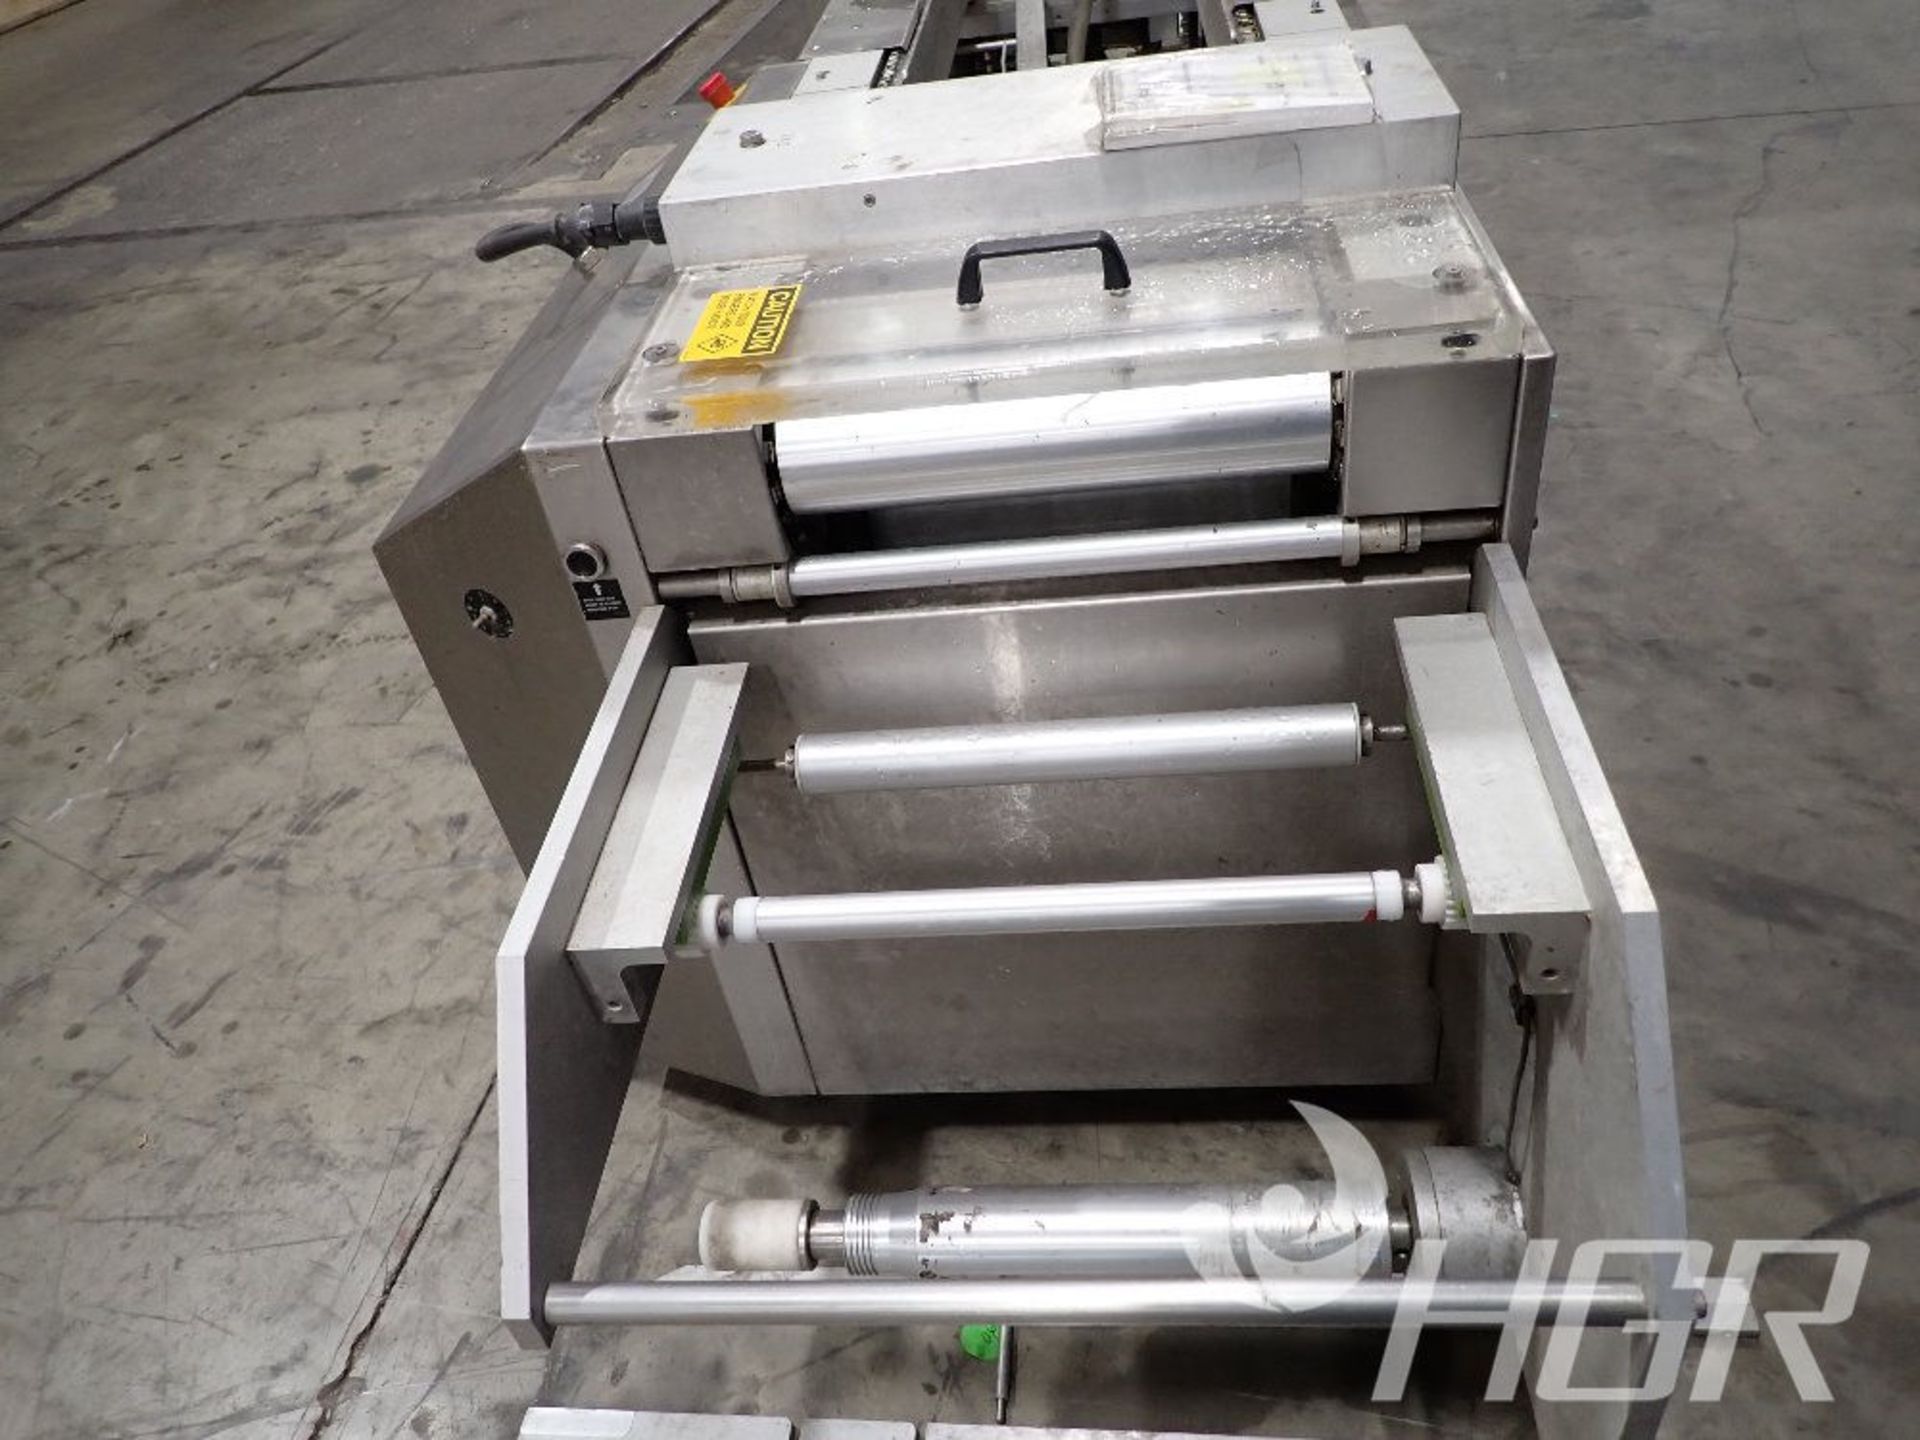 VC999 PACKAGING ROLL FED THERMOFORMER, Model RS420, Date: n/a; s/n RS2005225240, Approx. Capacity: - Image 4 of 14